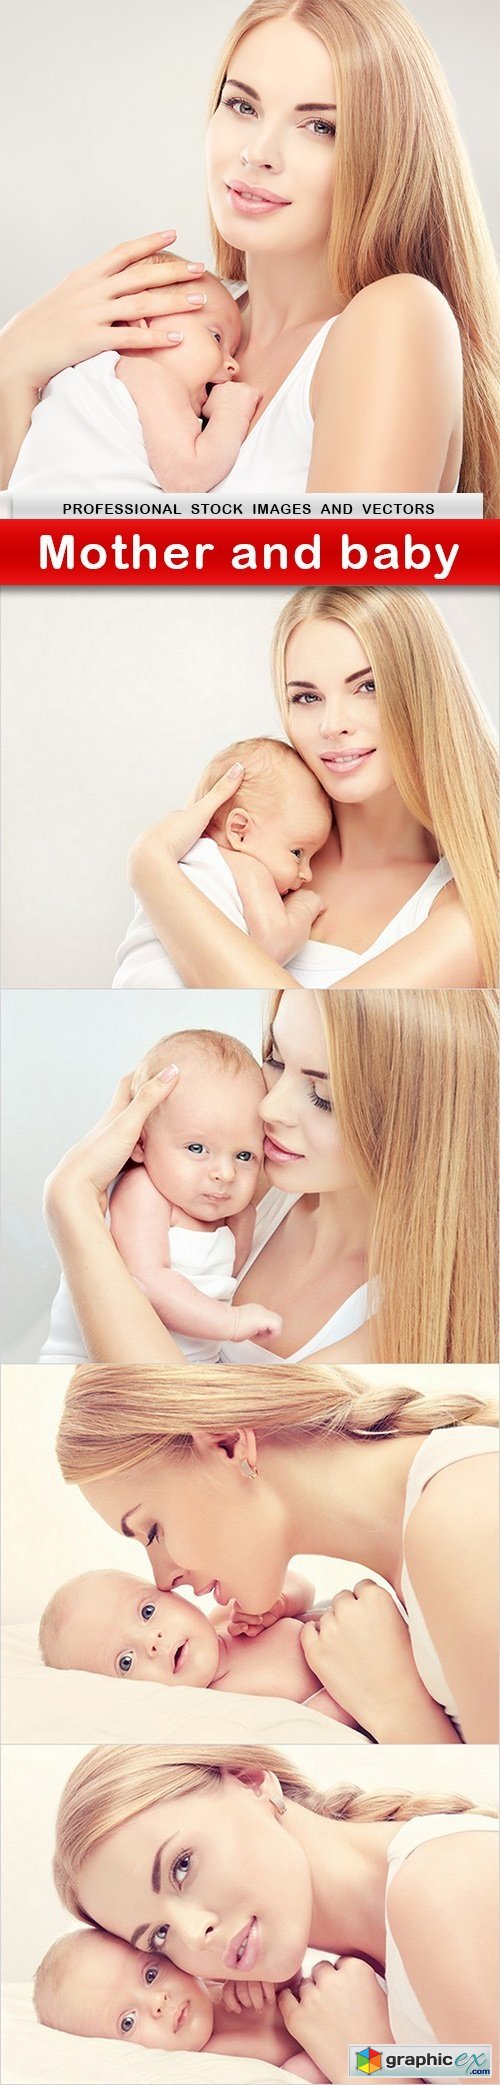 Mother and baby - 5 UHQ JPEG